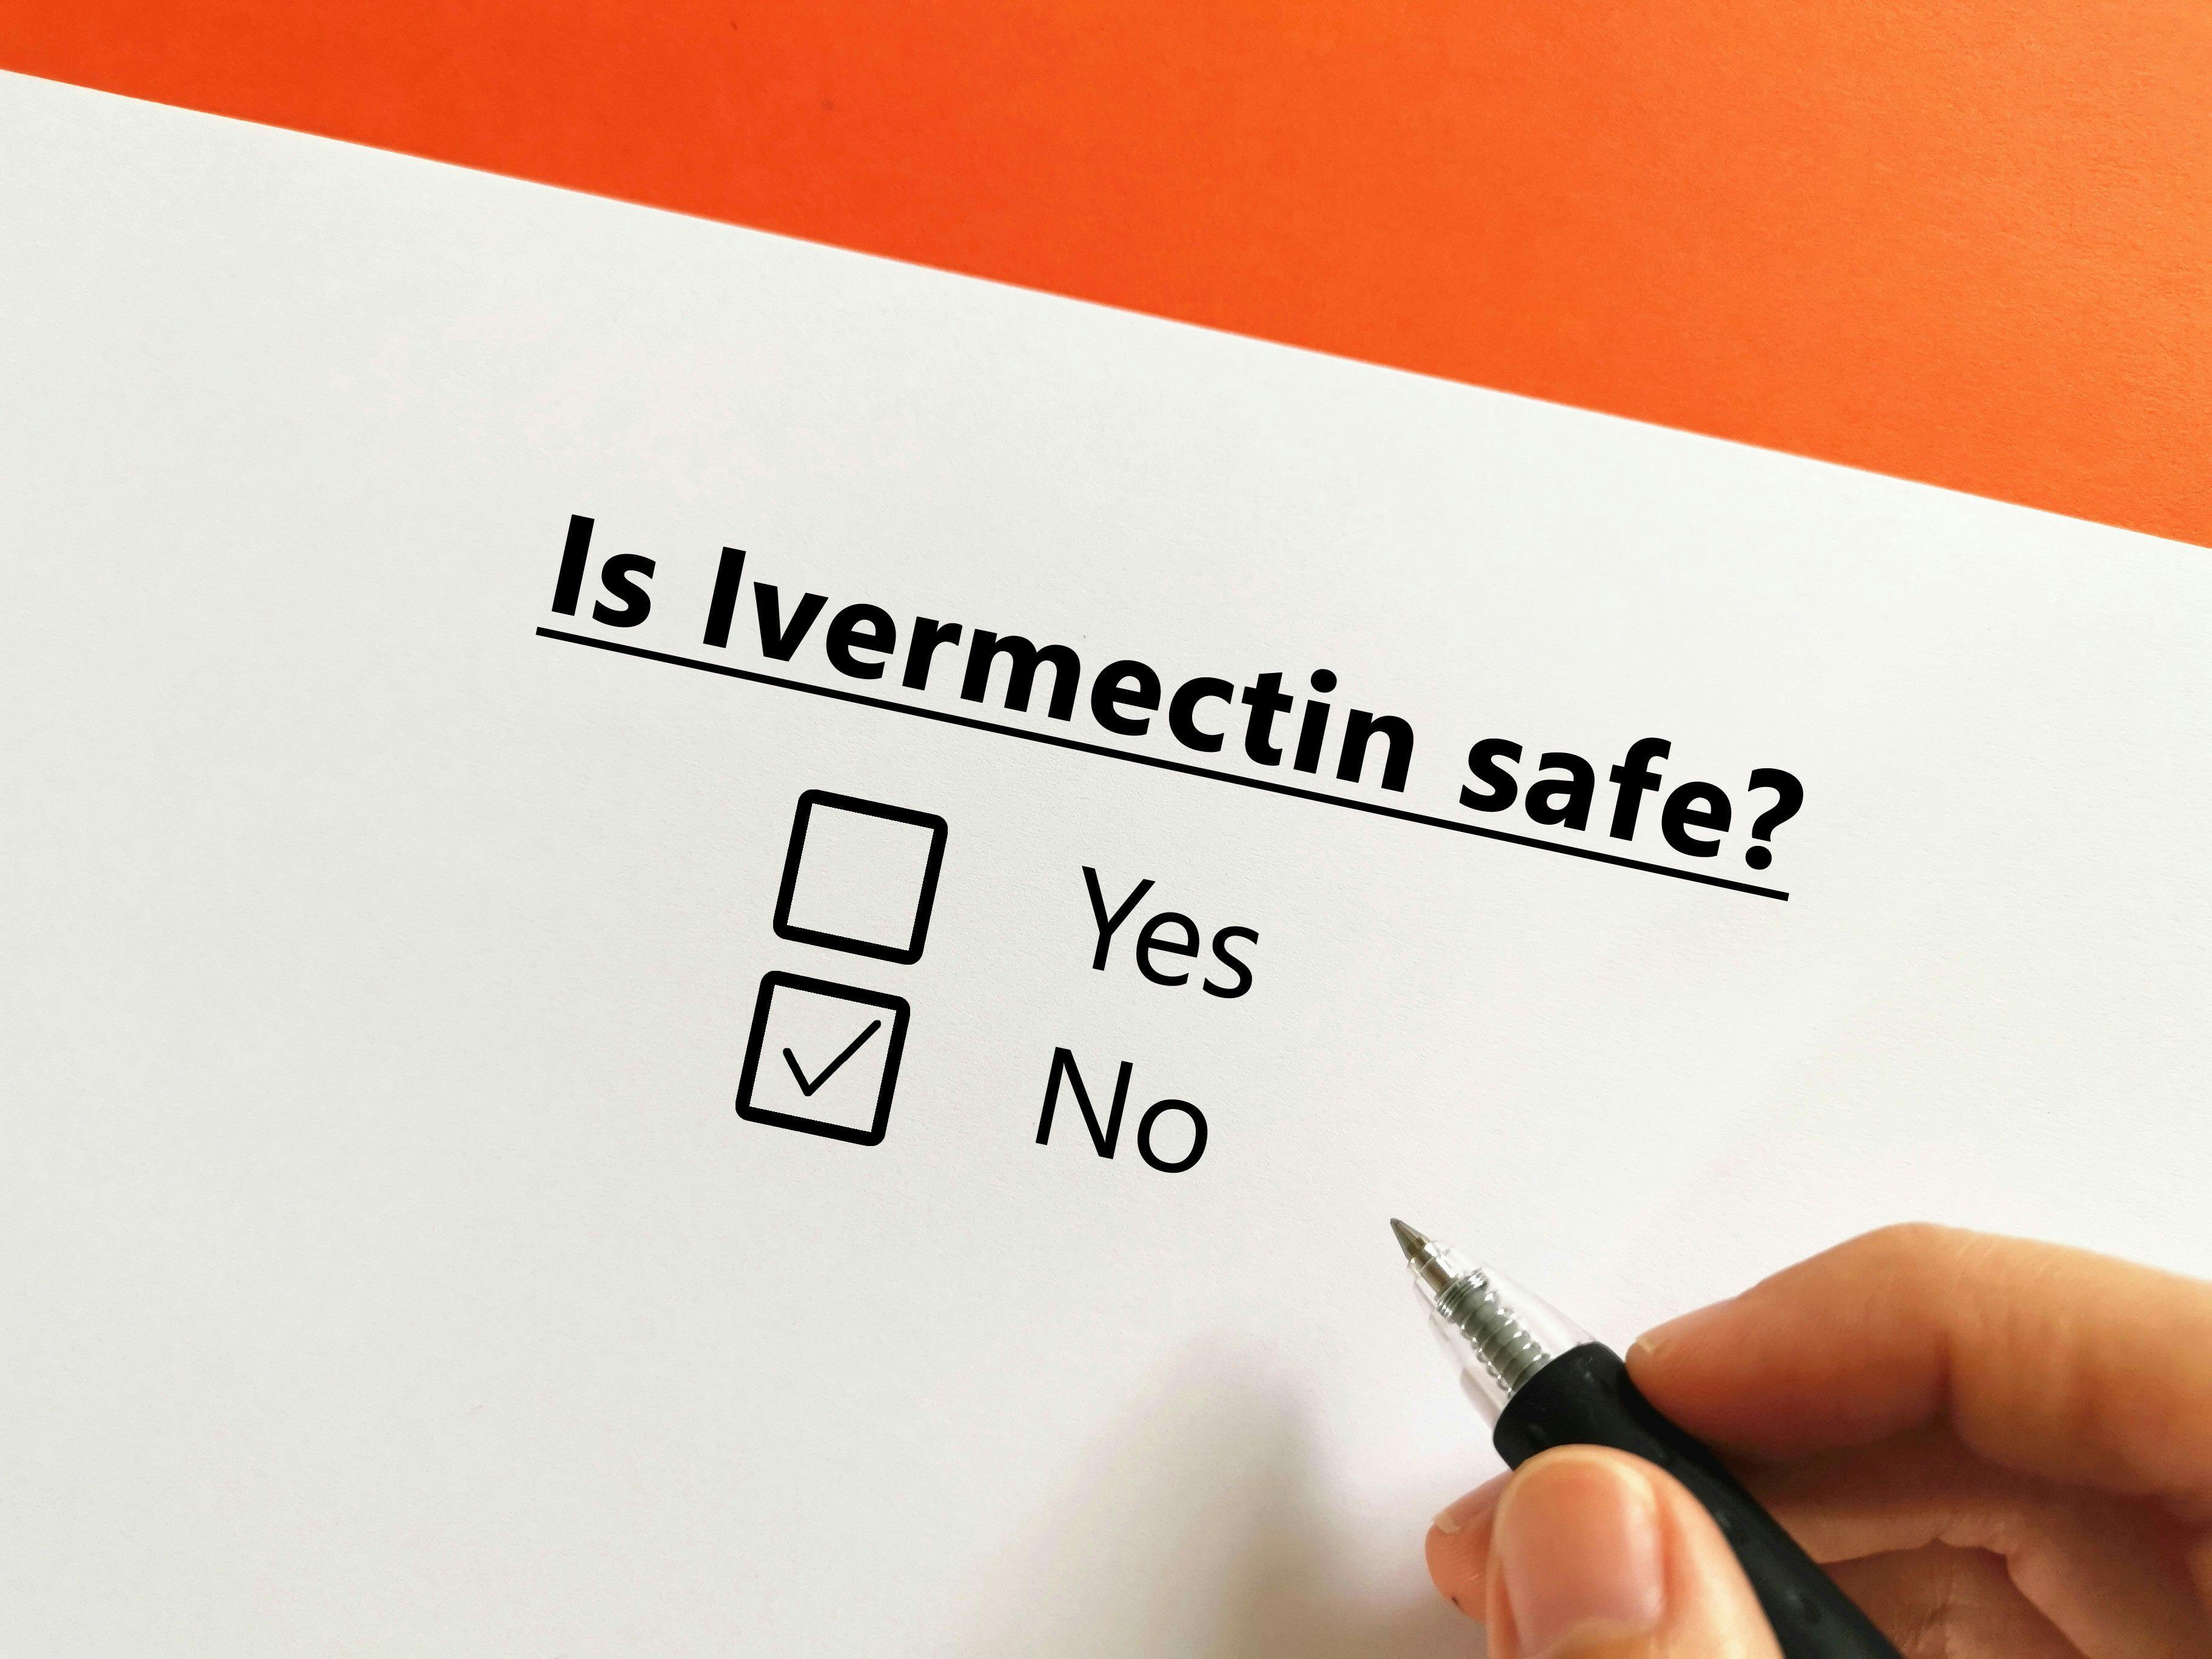 Healthcare Societies Oppose Legal Advocacy for Ivermectin